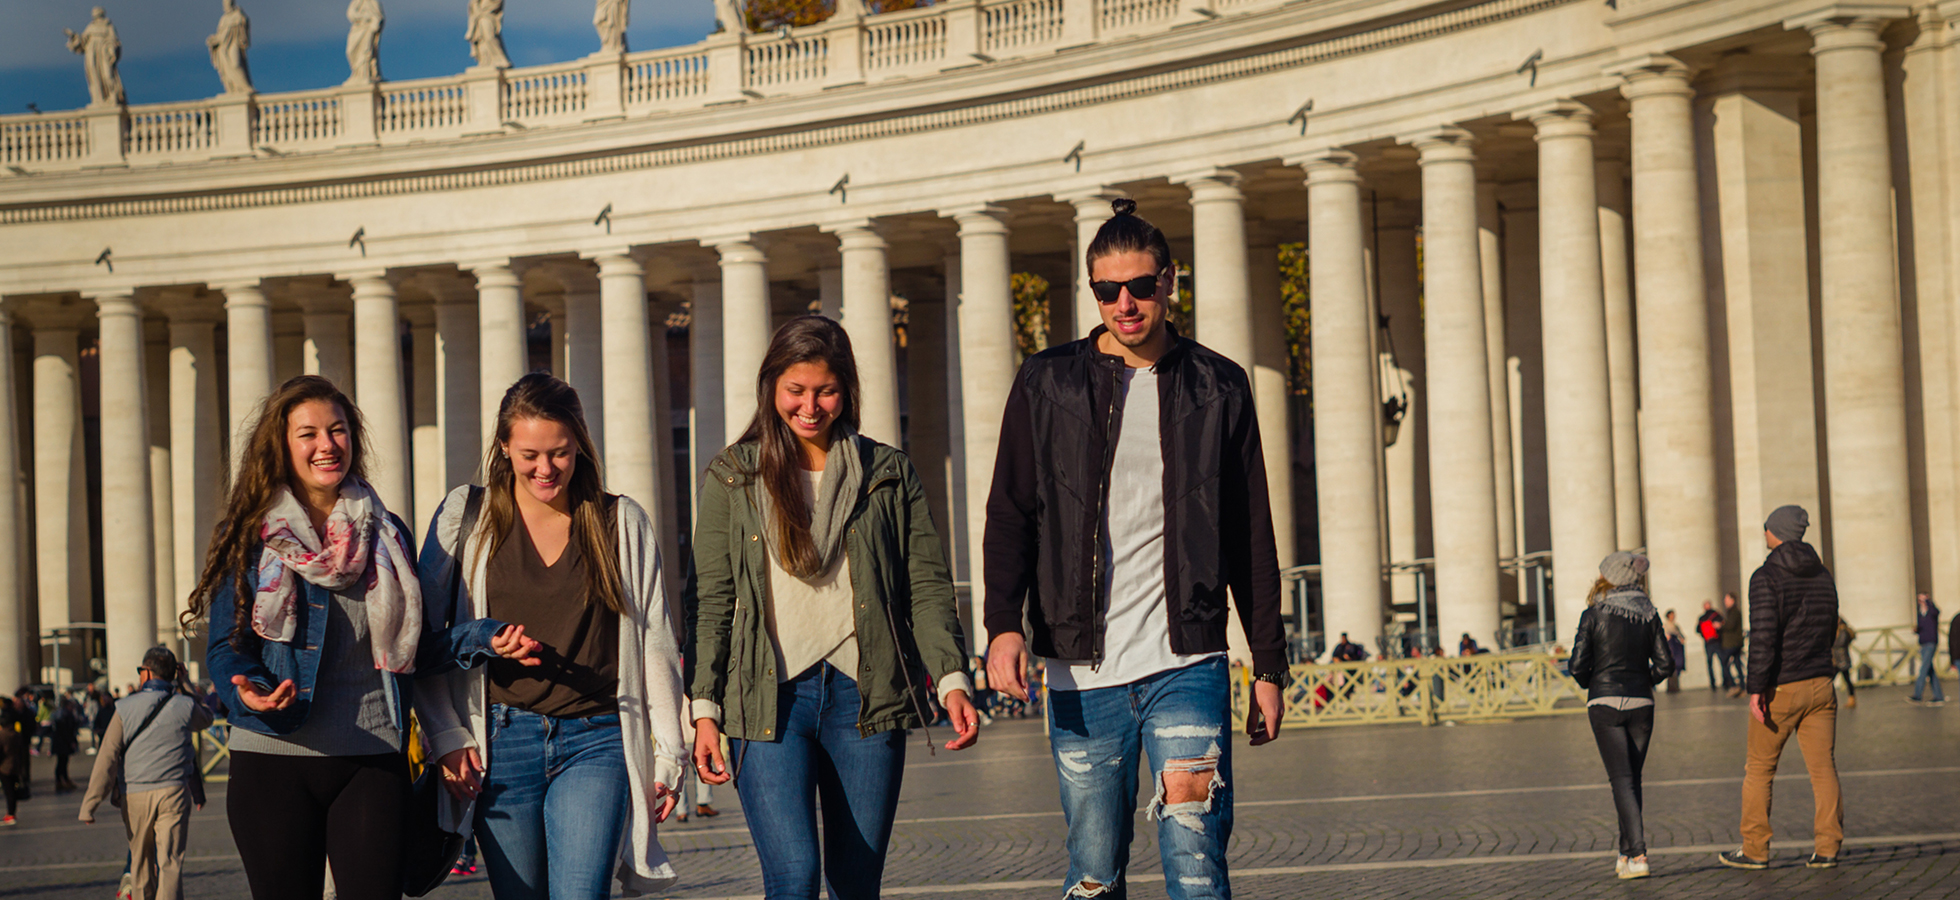 Experience the Rome Campus from Students' Perspective